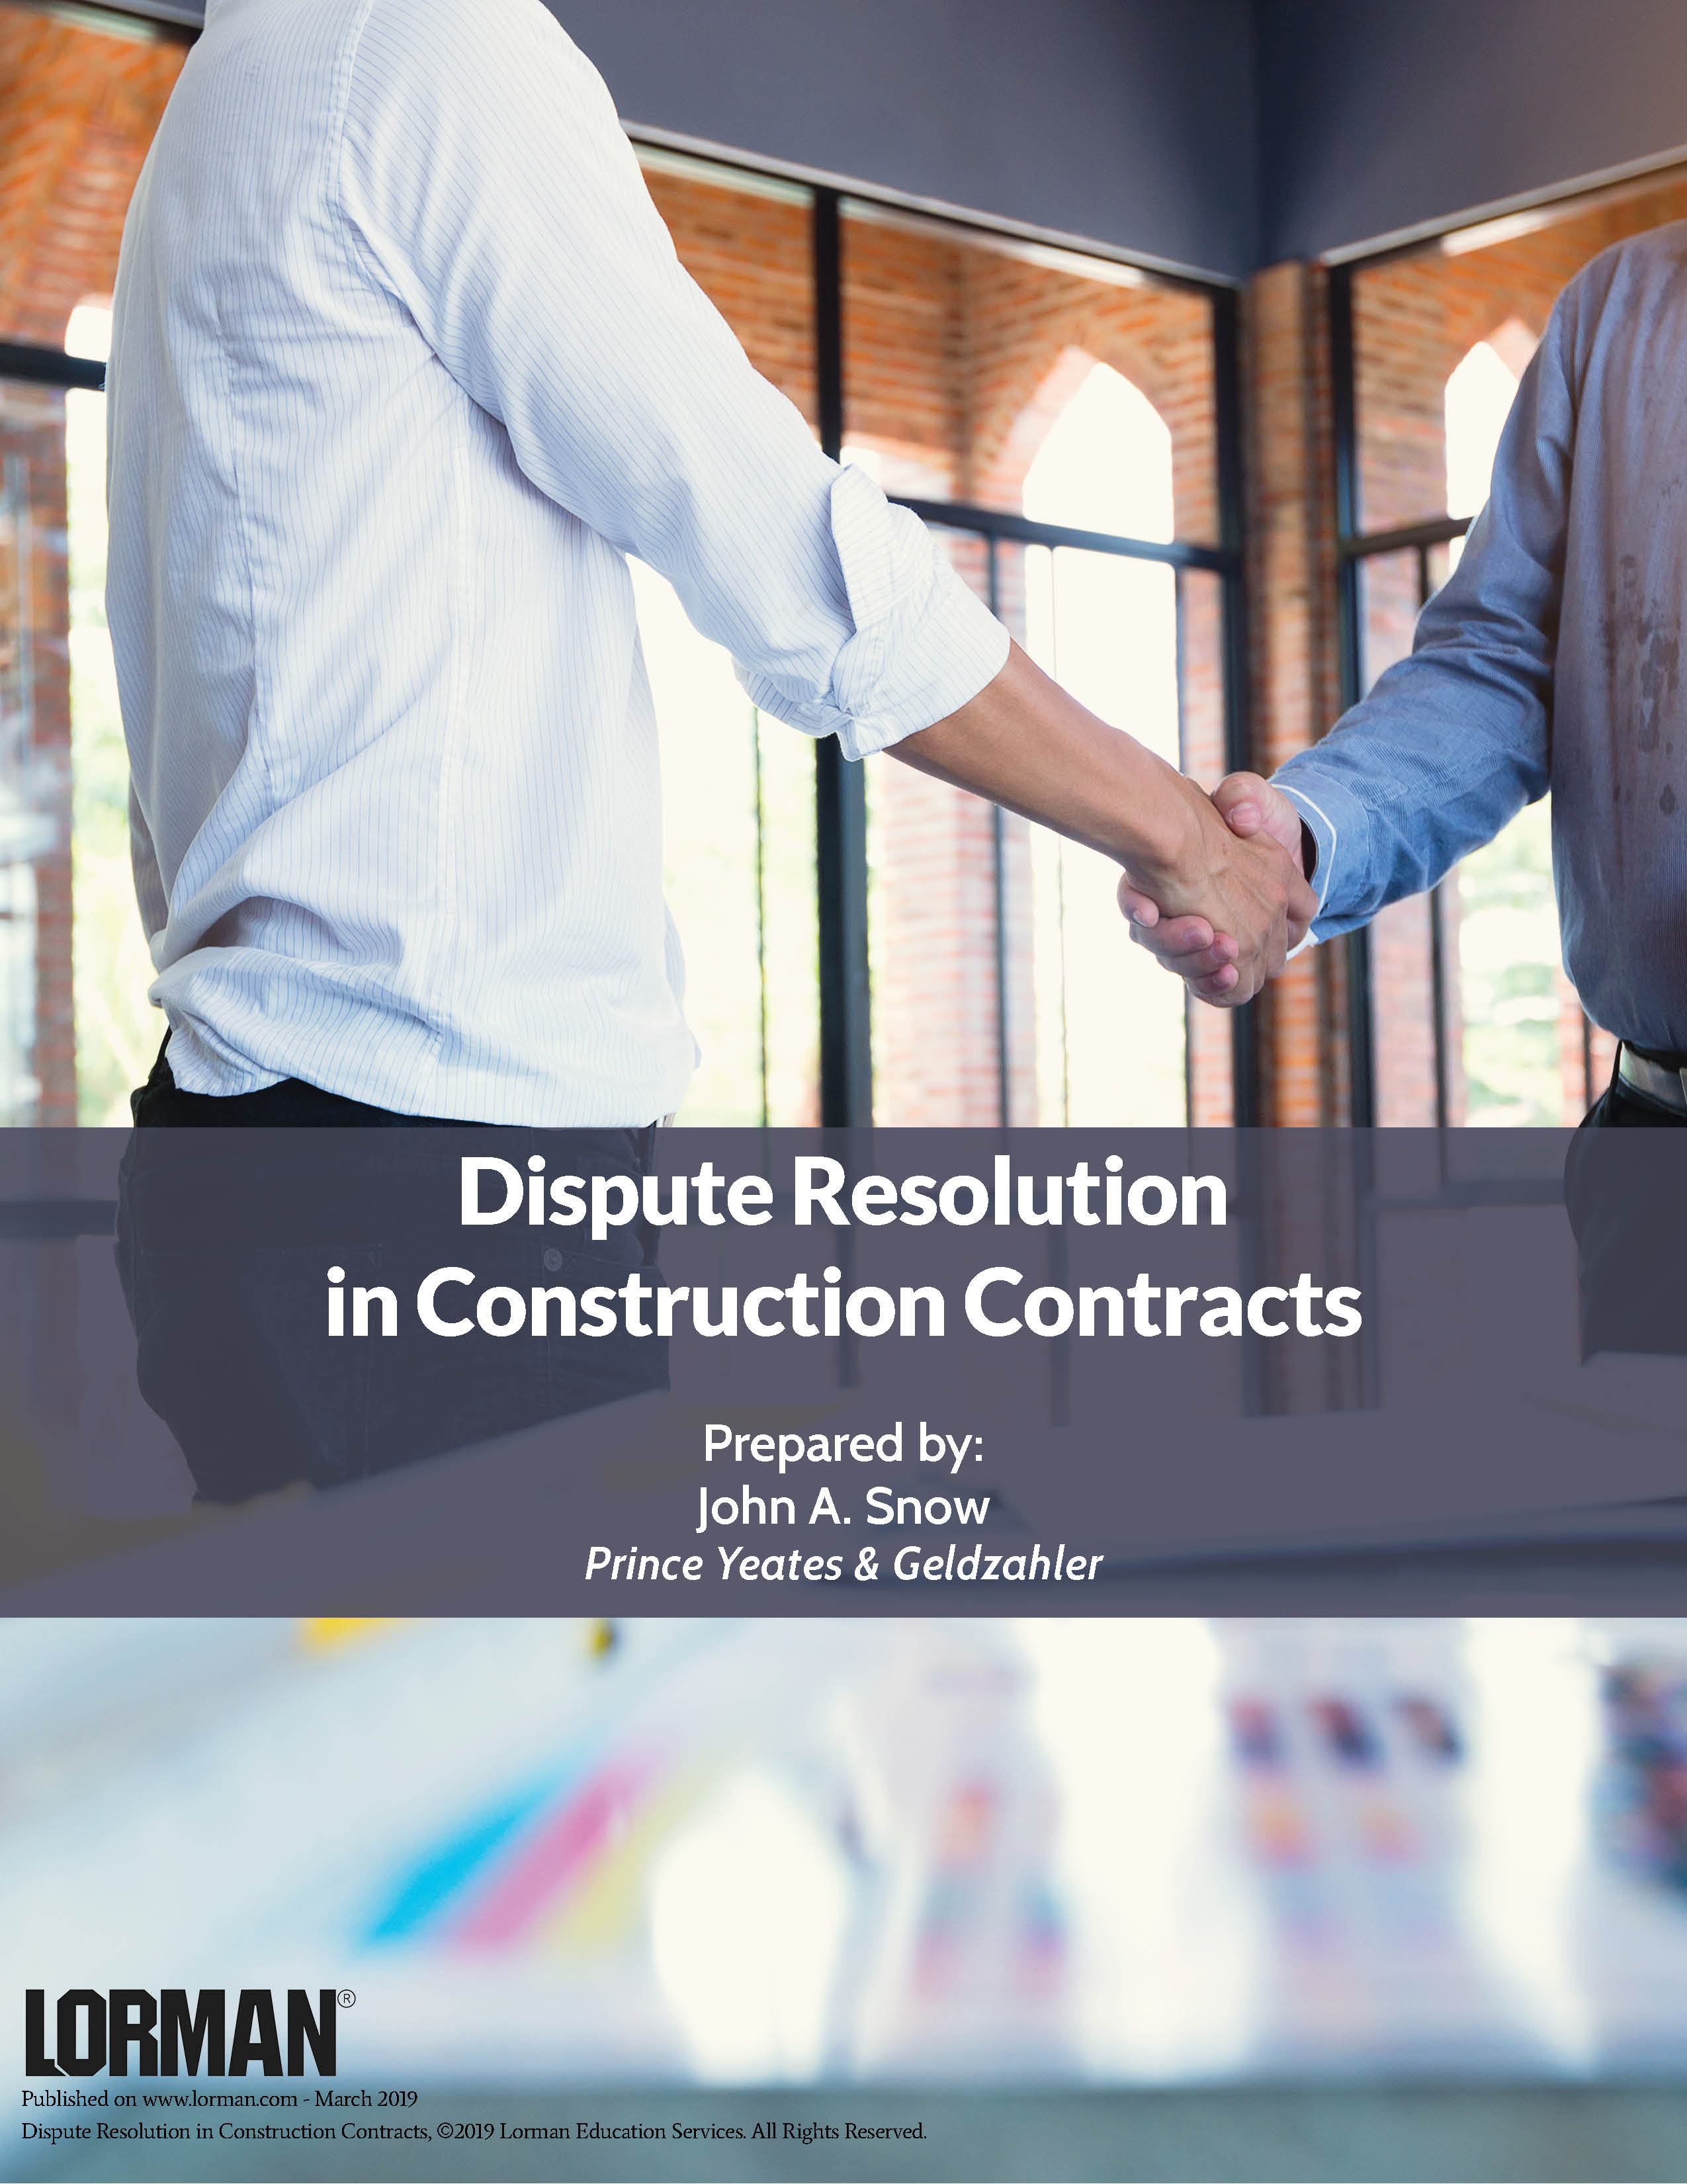 Dispute Resolution in Construction Contracts